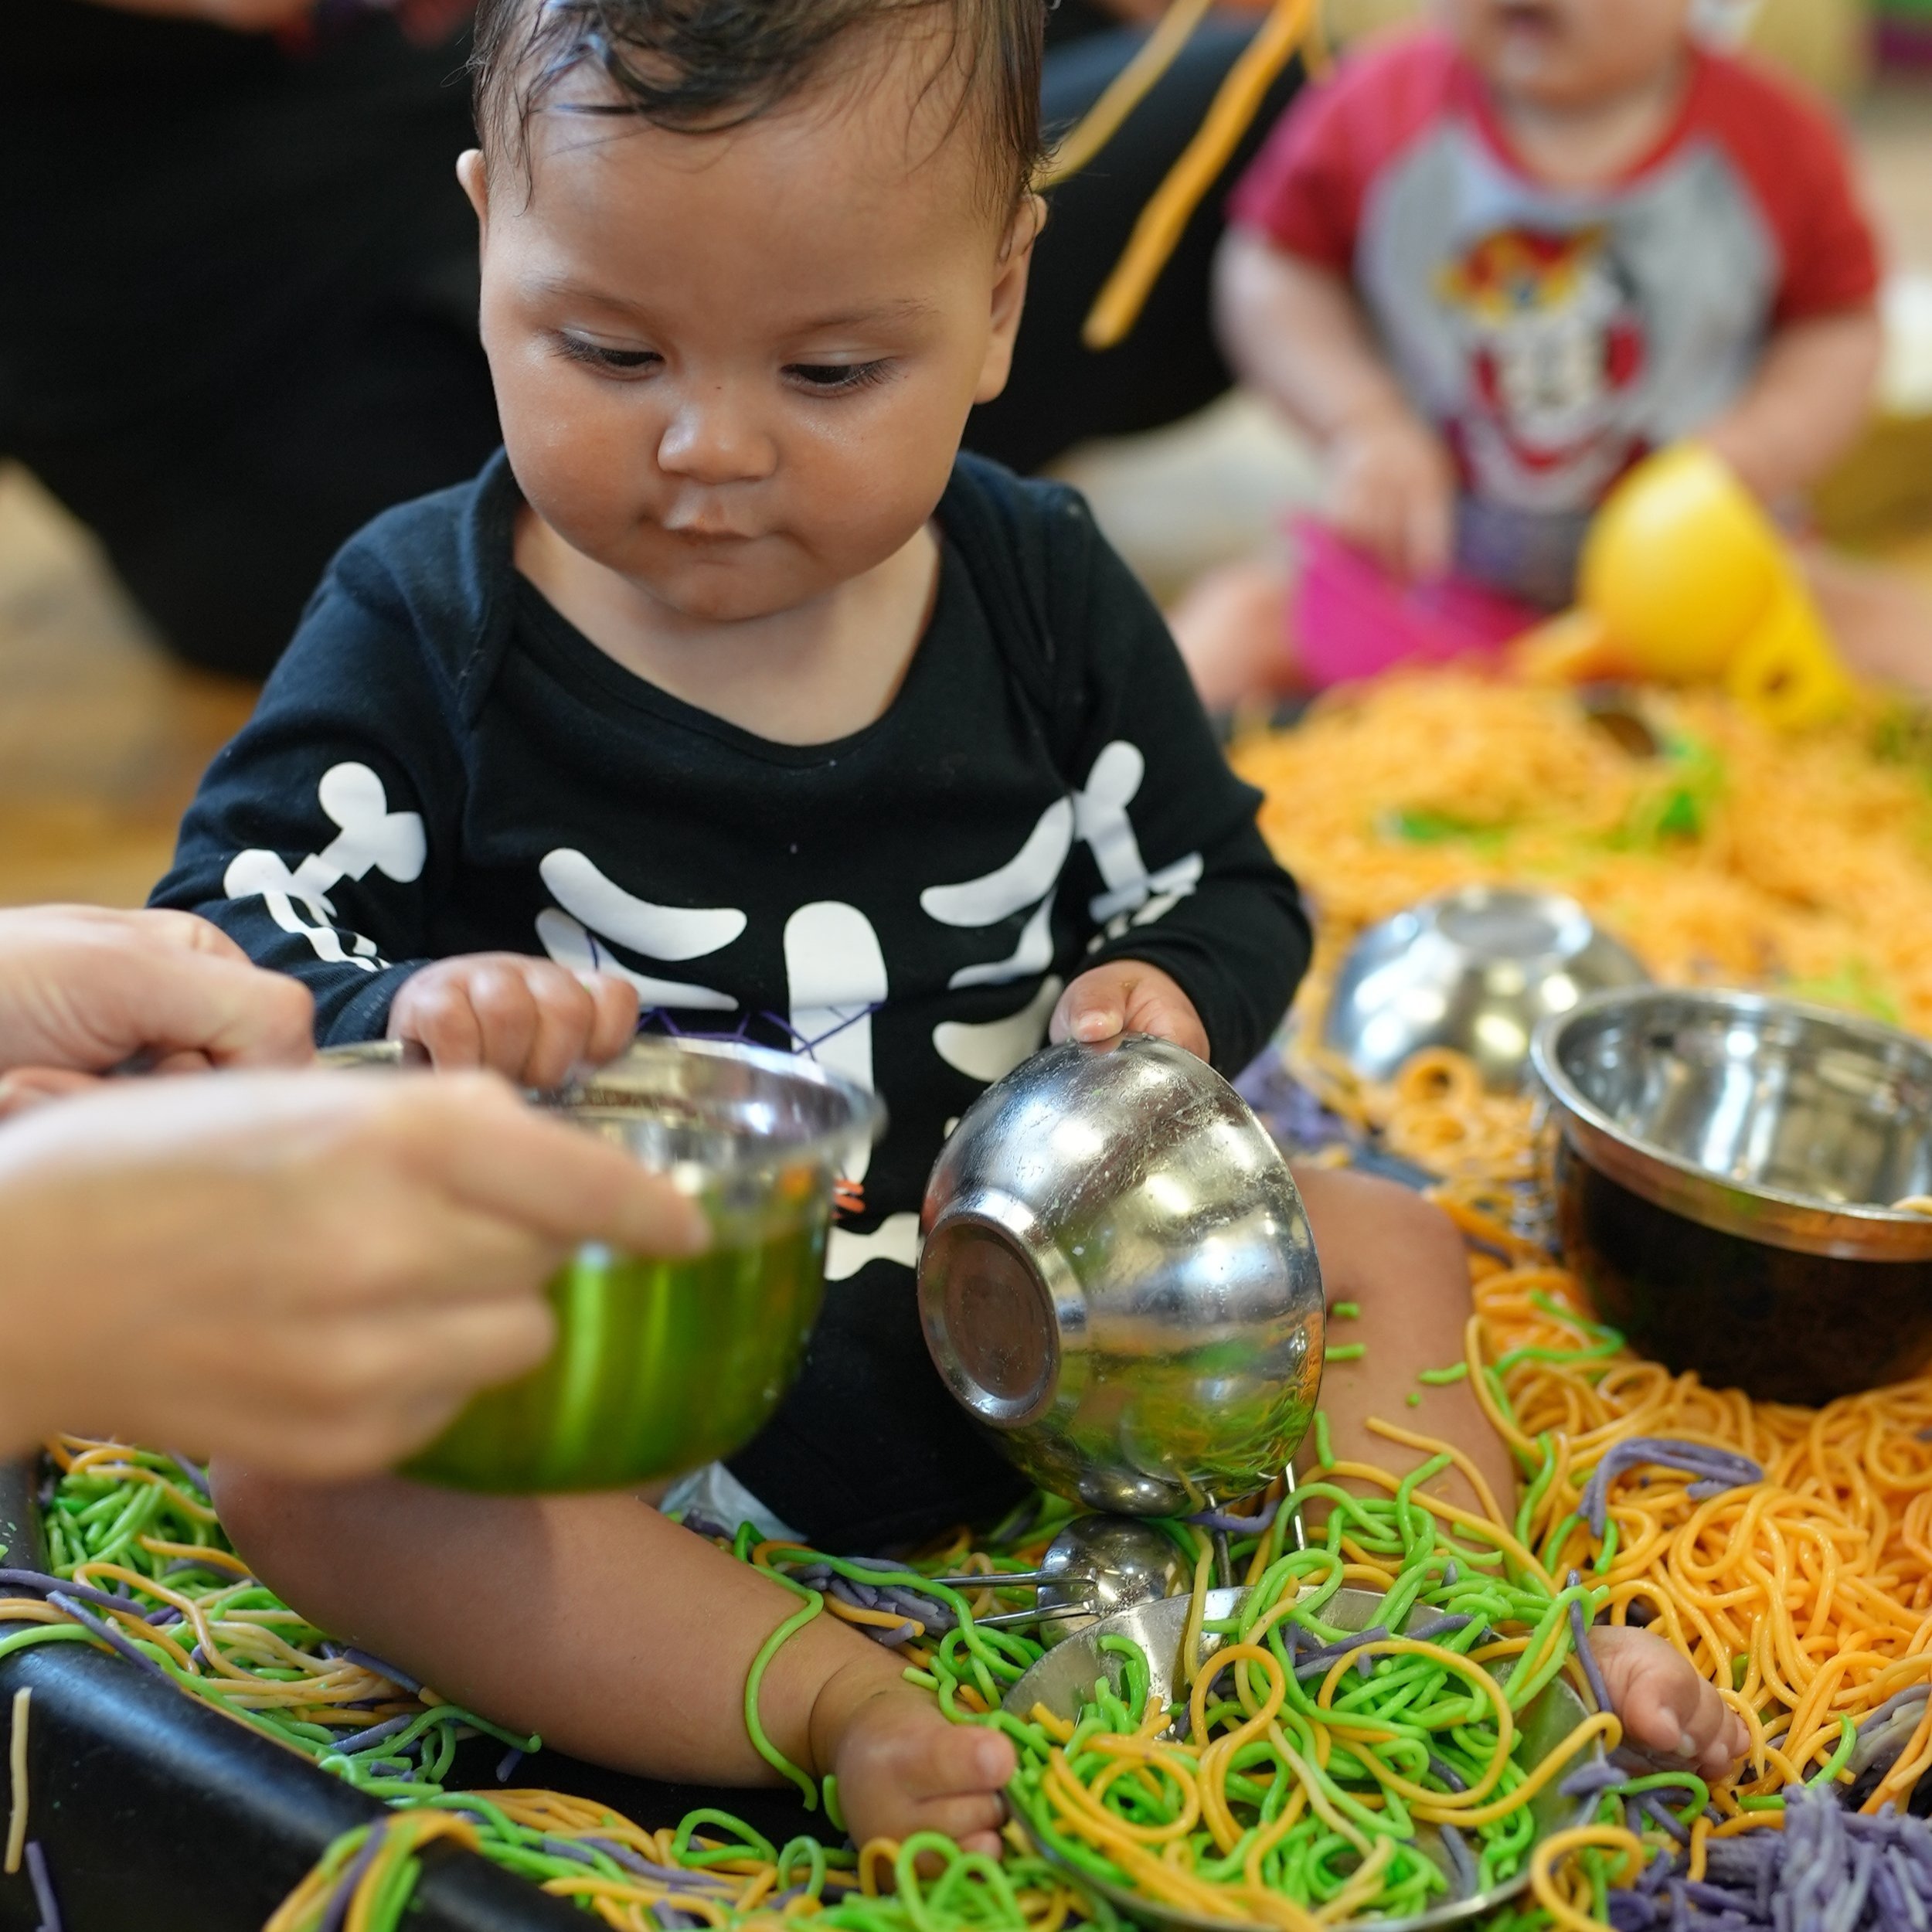  Little boy is in a huge tray filled with colourful cooked spaghetti. He is holding a metal bowl 